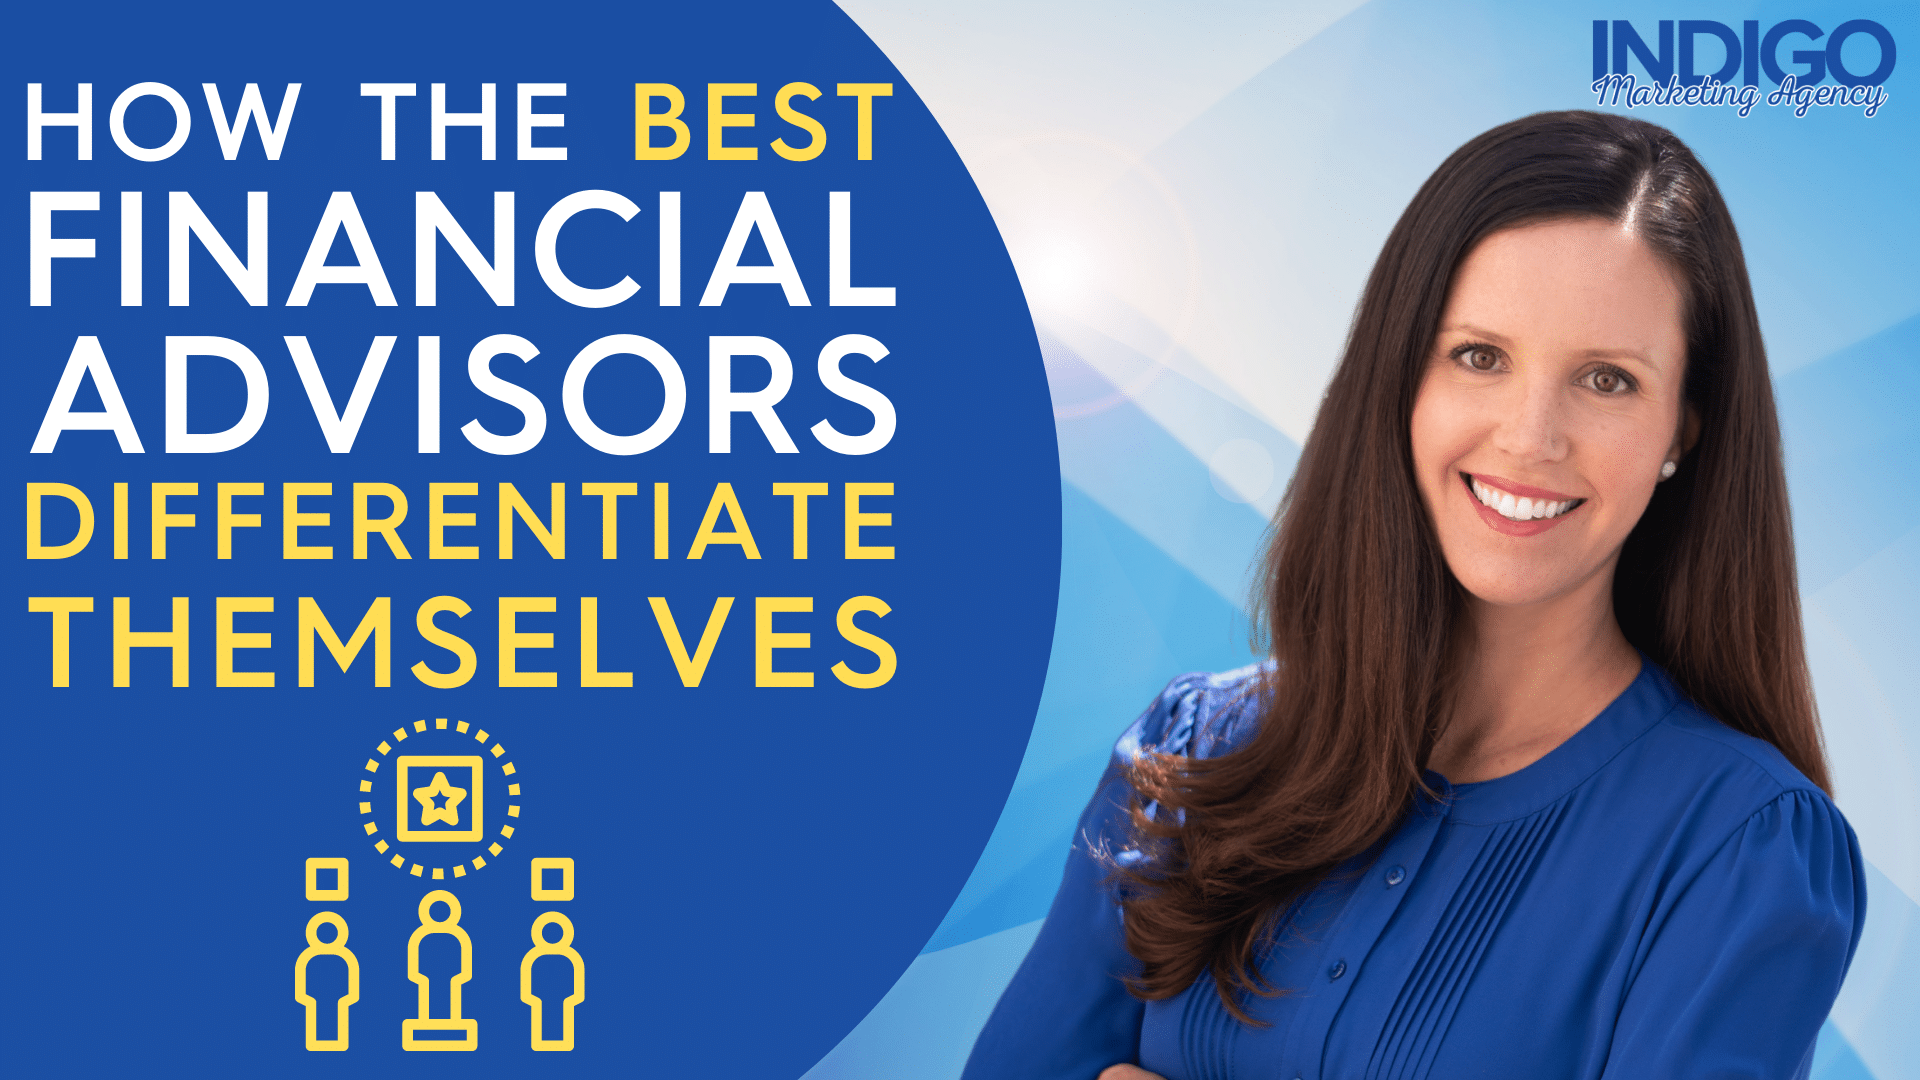 How the best financial advisors differentiate themselves